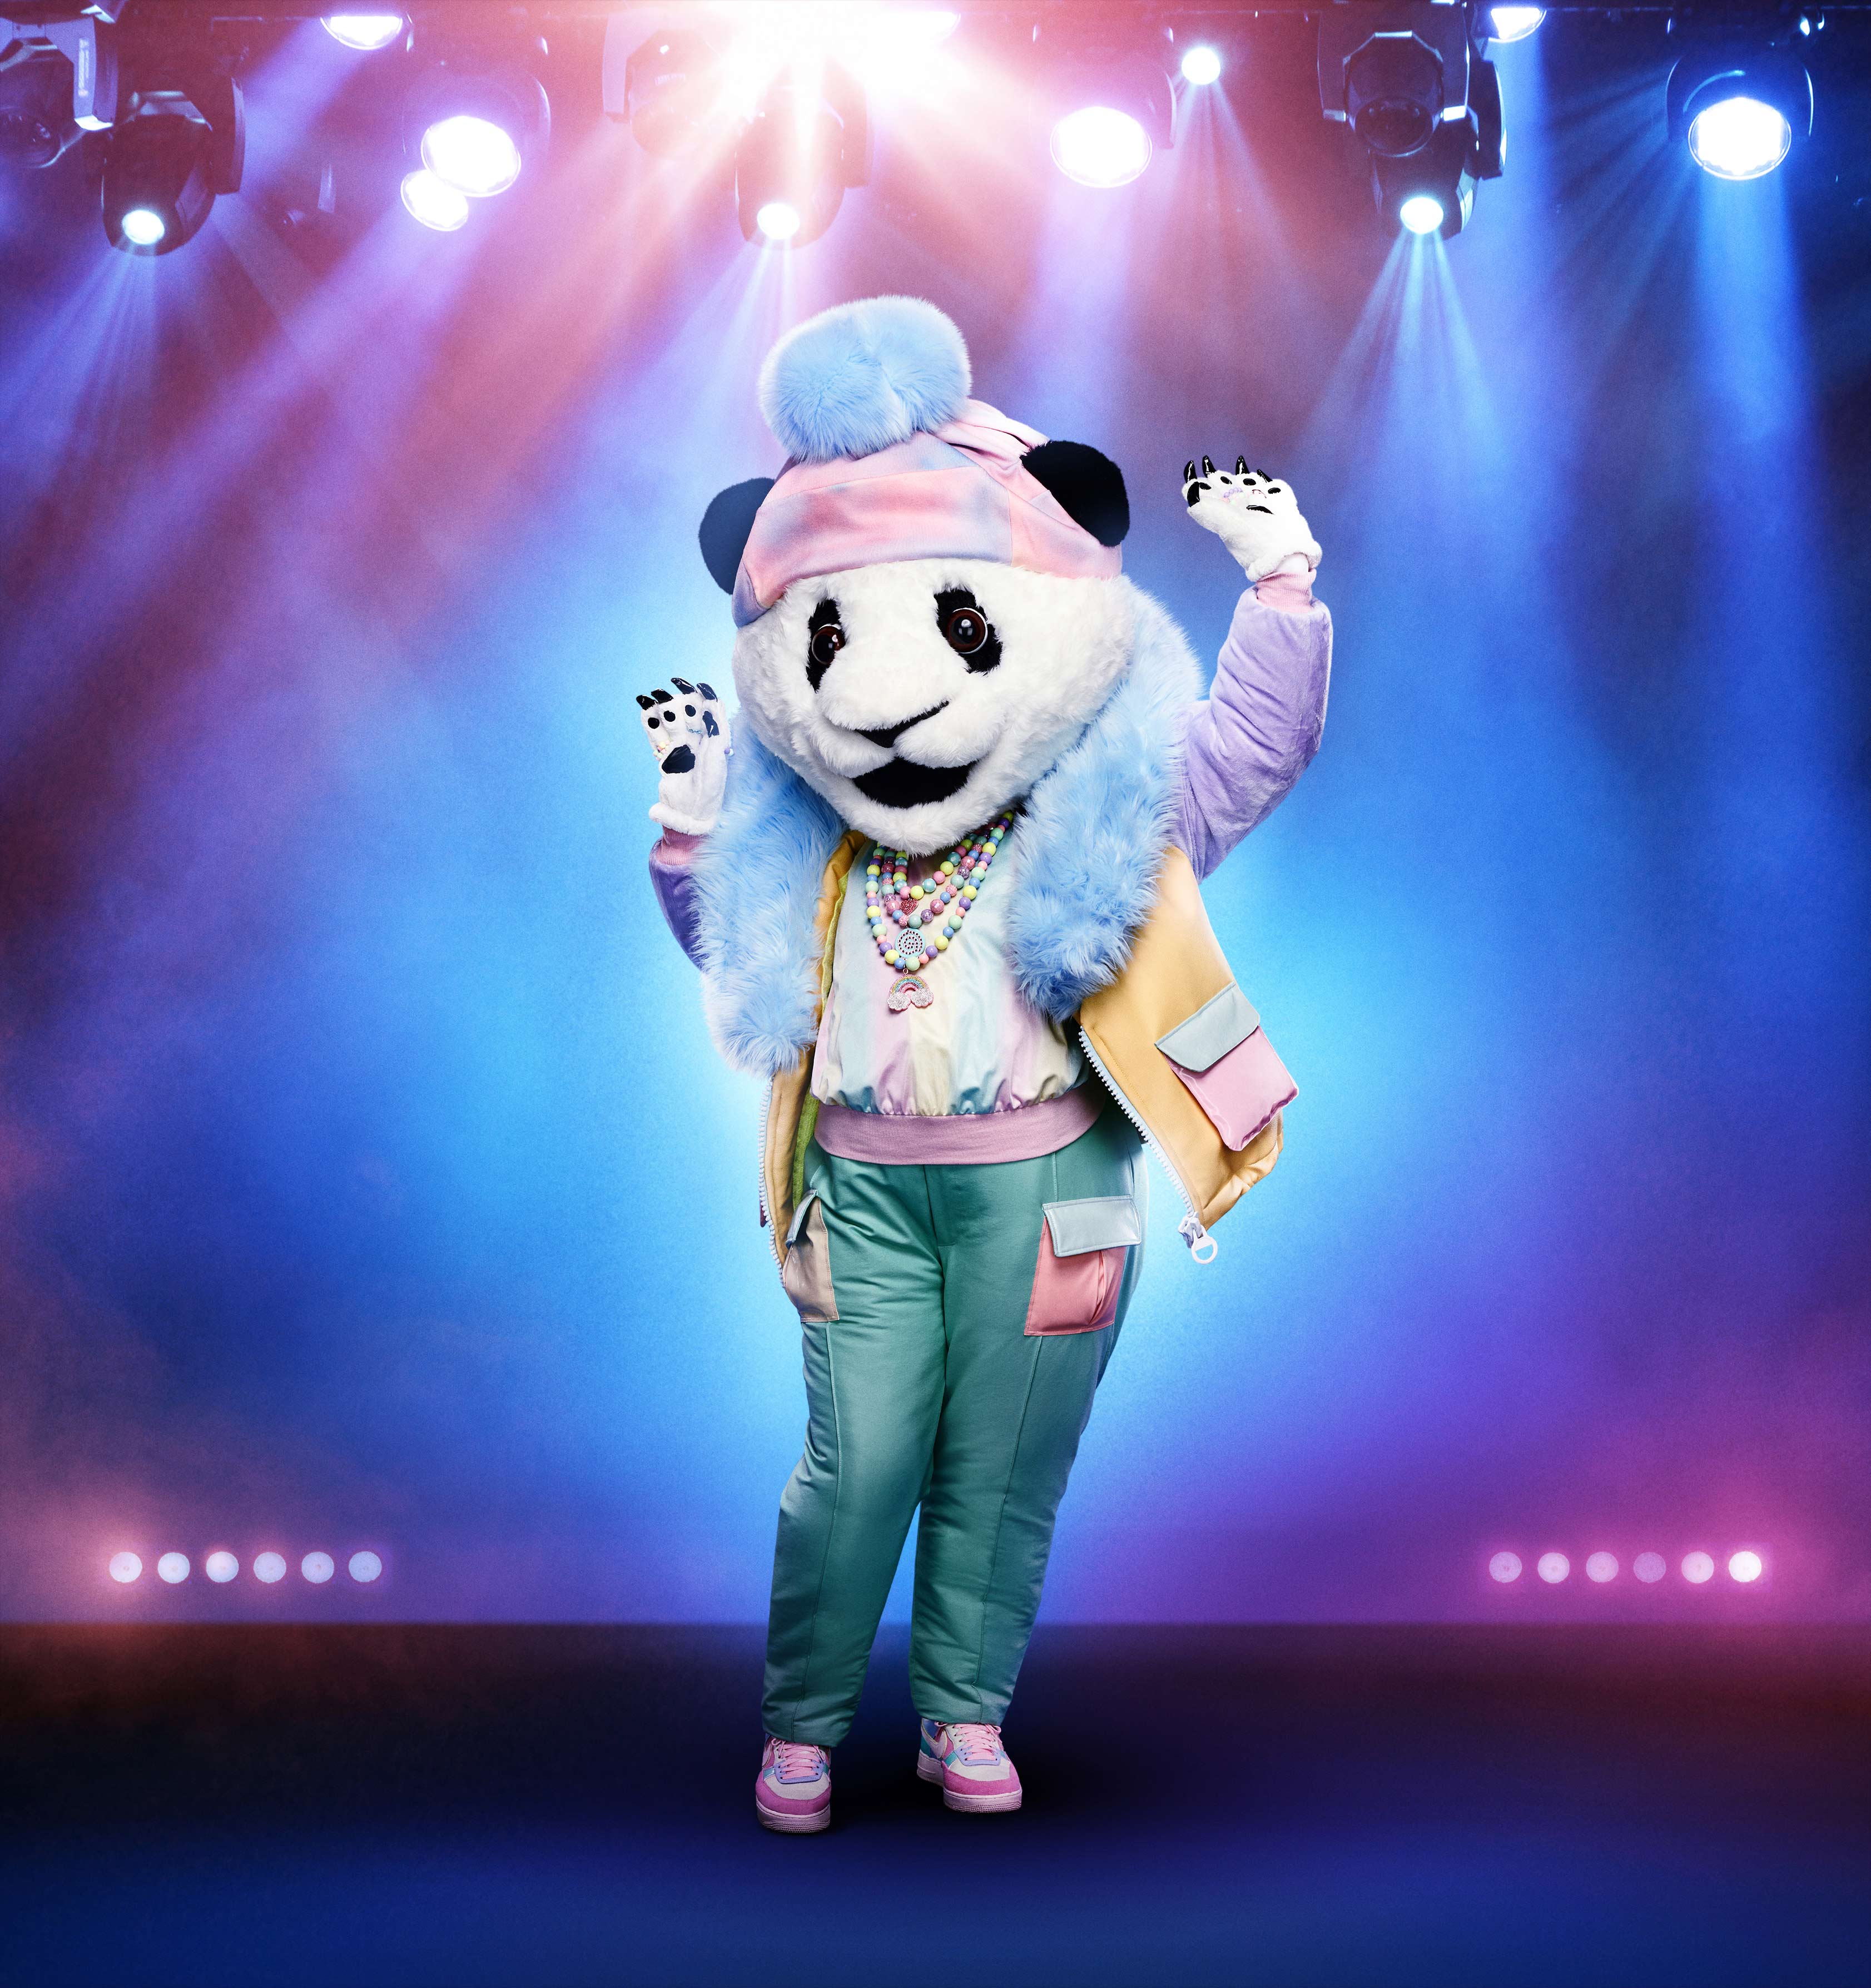 How old is Panda from the Masked Singer?